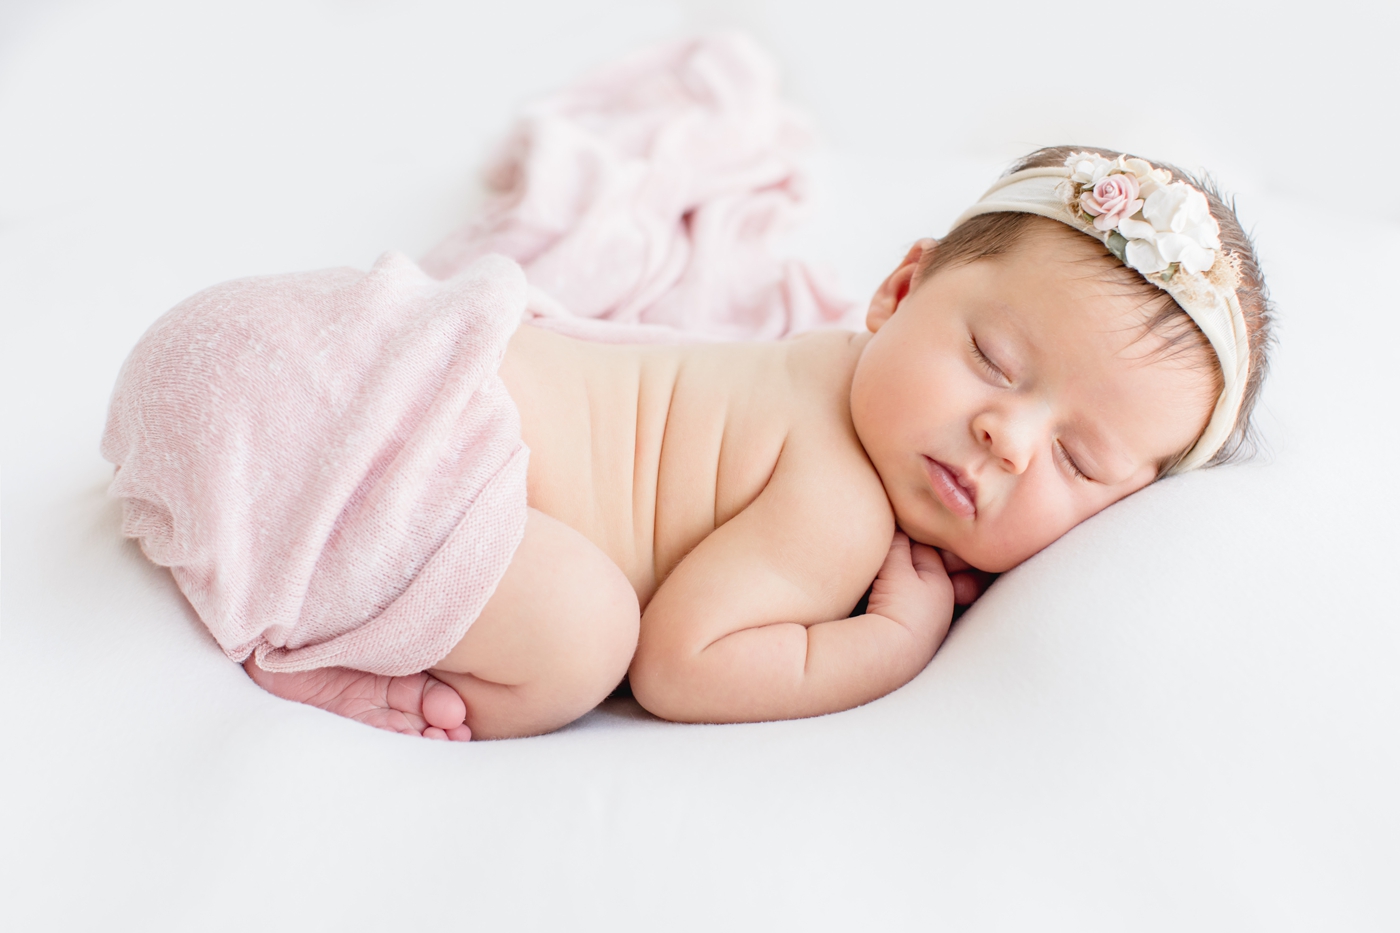 Baby girl on white background with pink swaddle and floral headband during studio newborn session in Austin TX. Photo by Sana Ahmed Photography.